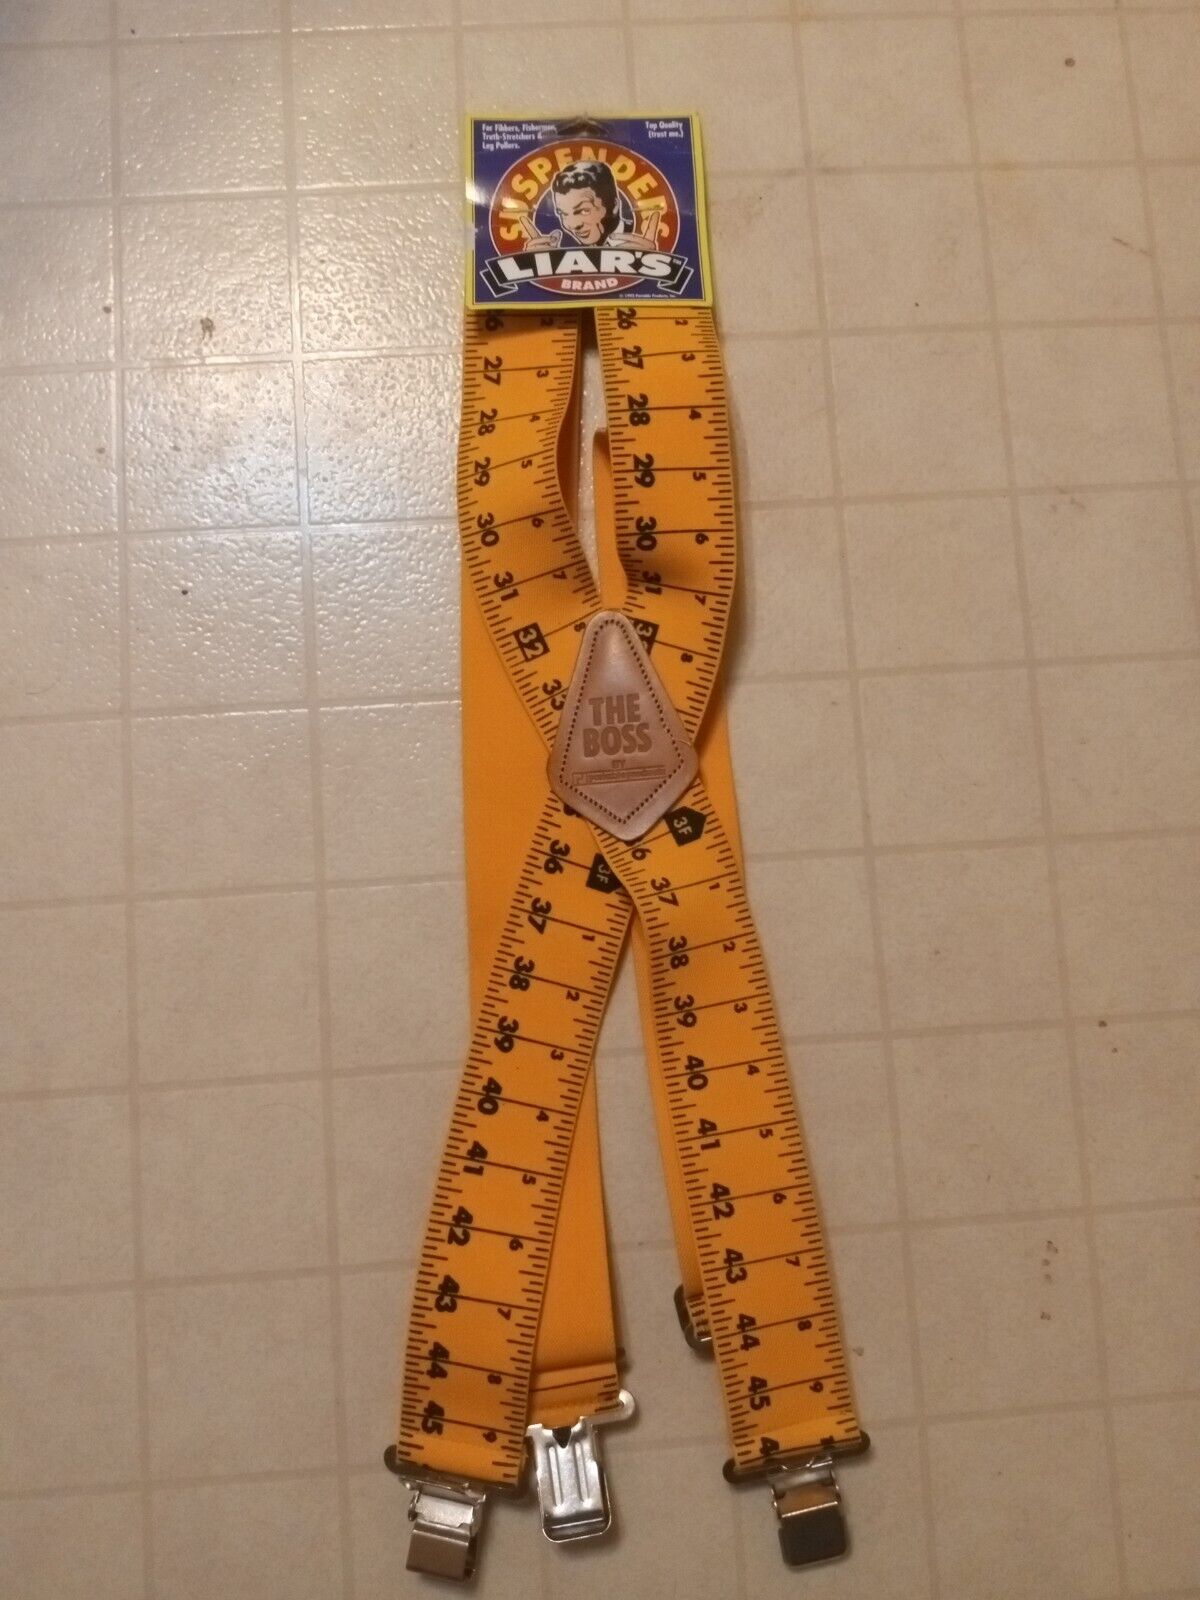 Vintage Liar's Brand Yardstick Suspenders Never Used Perfect Condition!